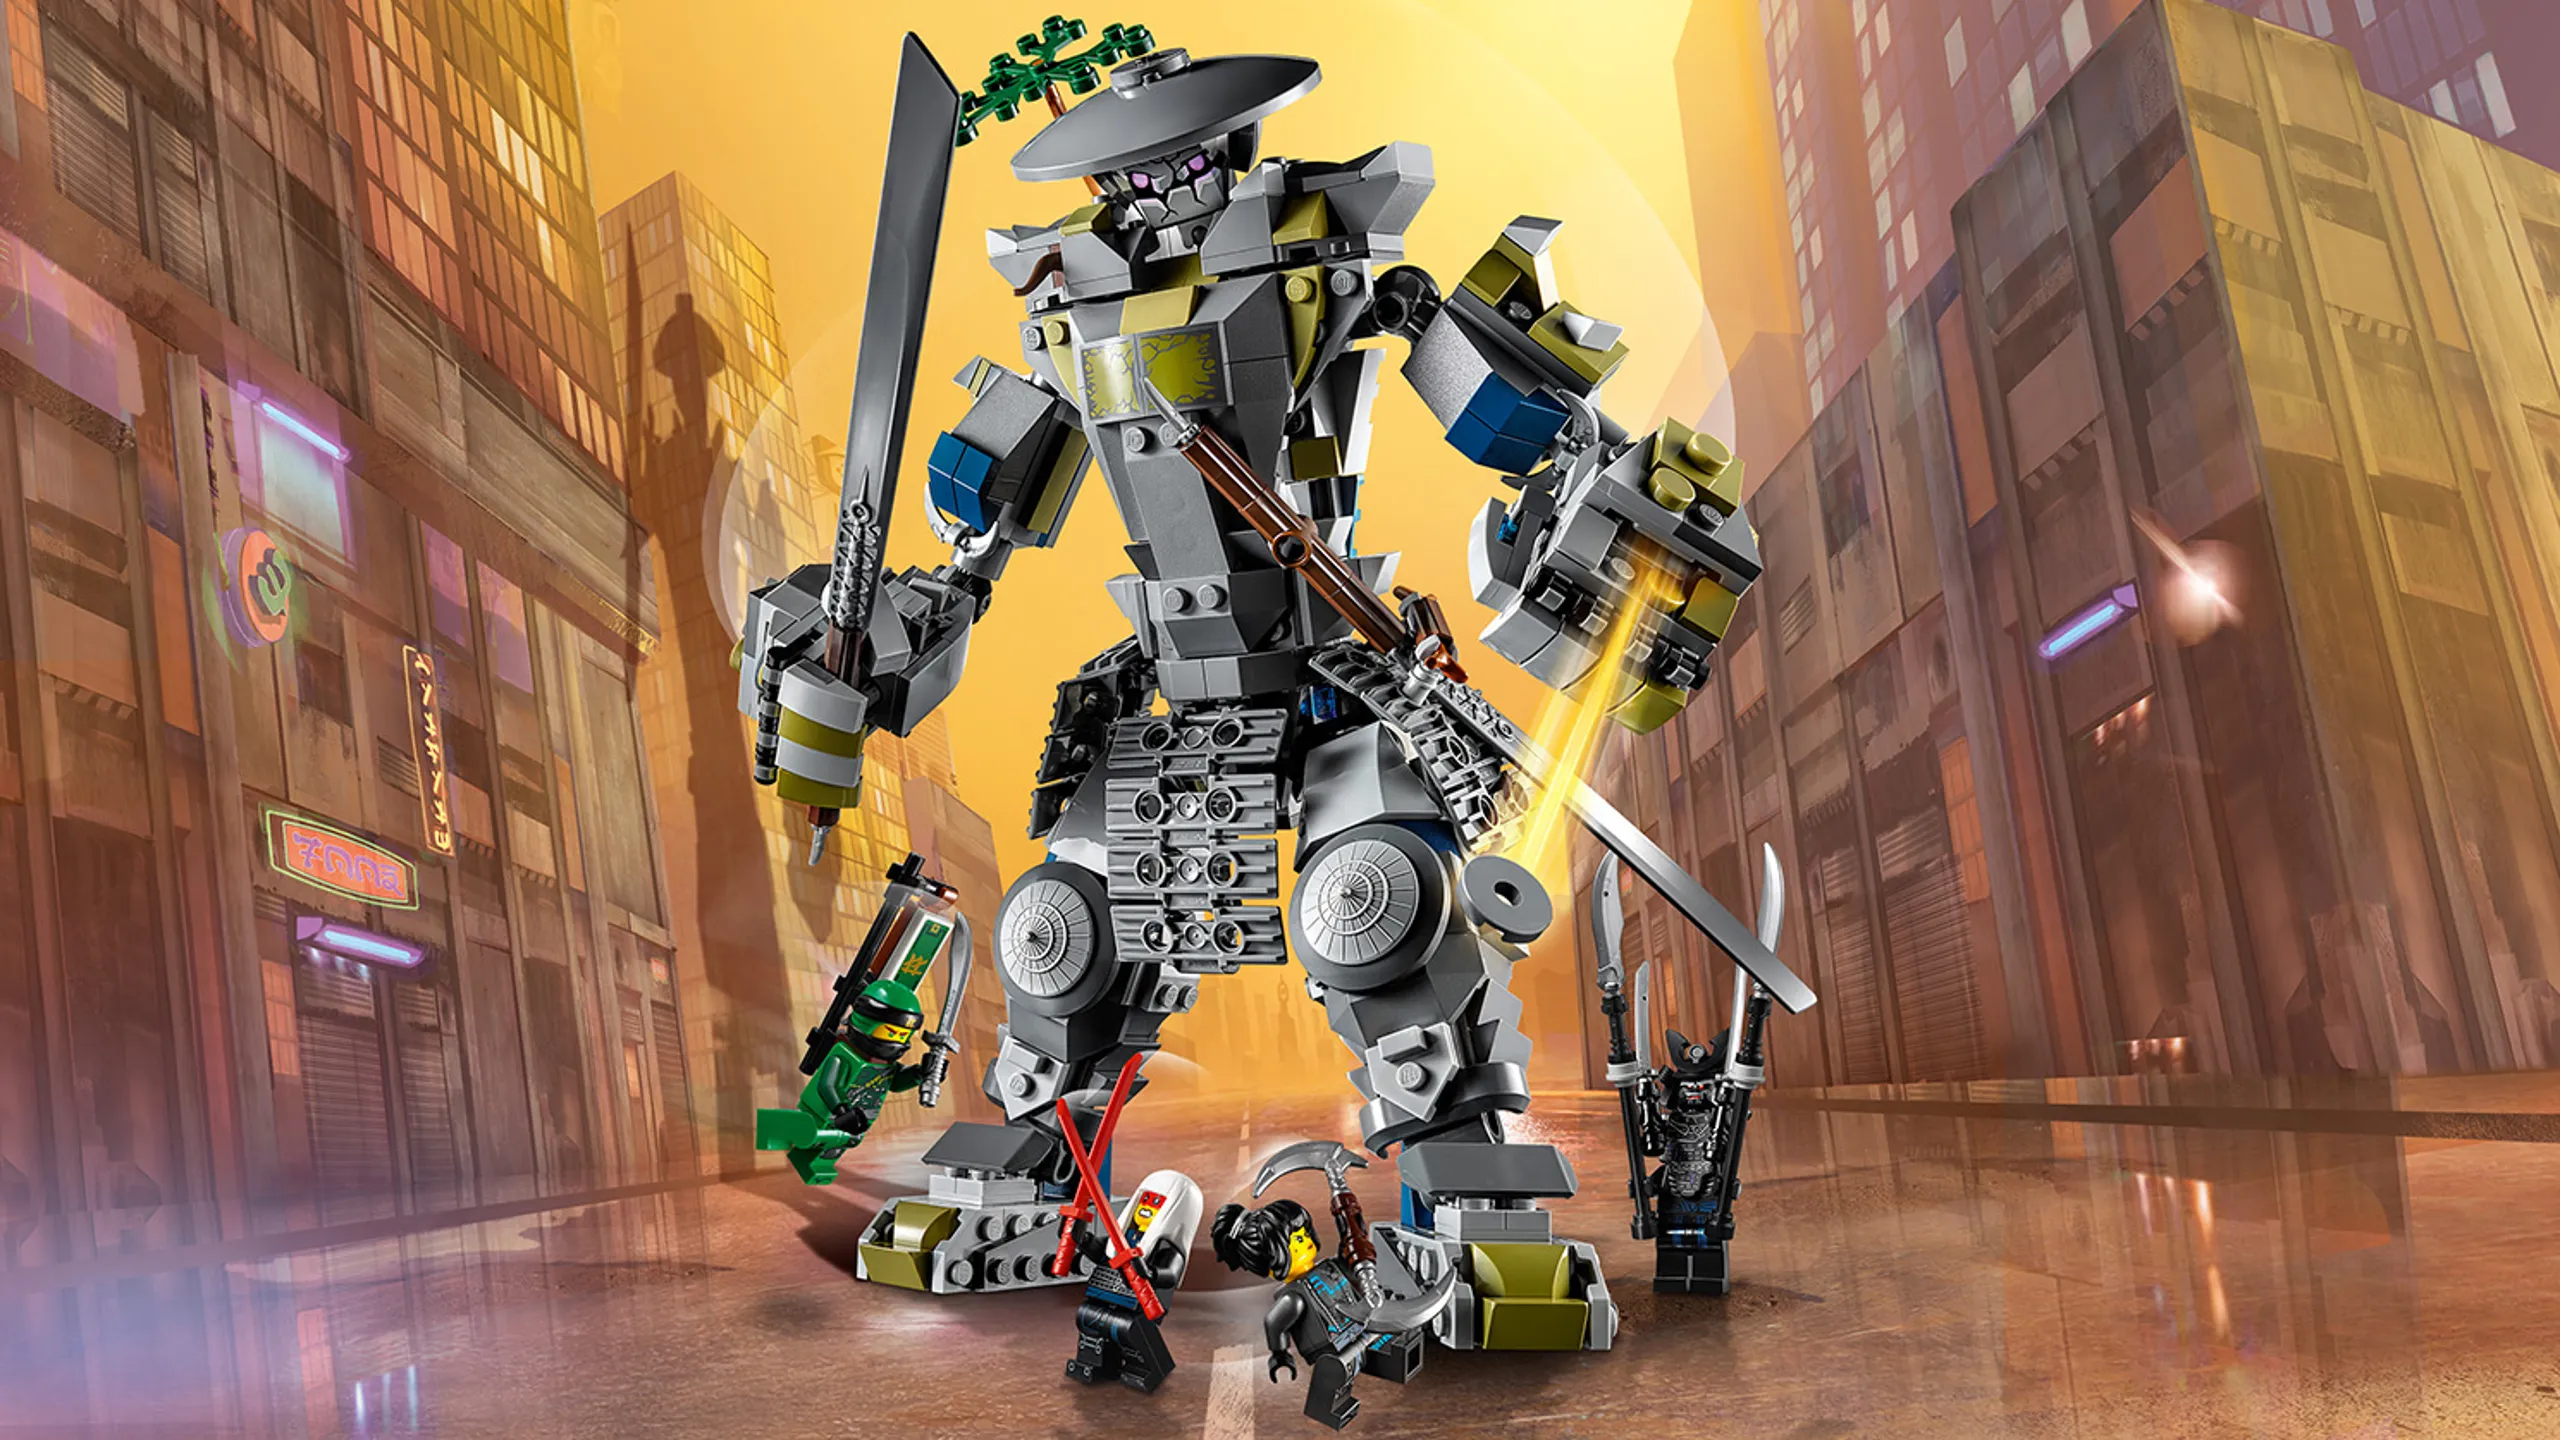 LEGO Ninjago - 70658 Oni Titan - This huge grey robot mech has gigantic katanas and the ninja heroes tries to stop the mech from destroying the city.